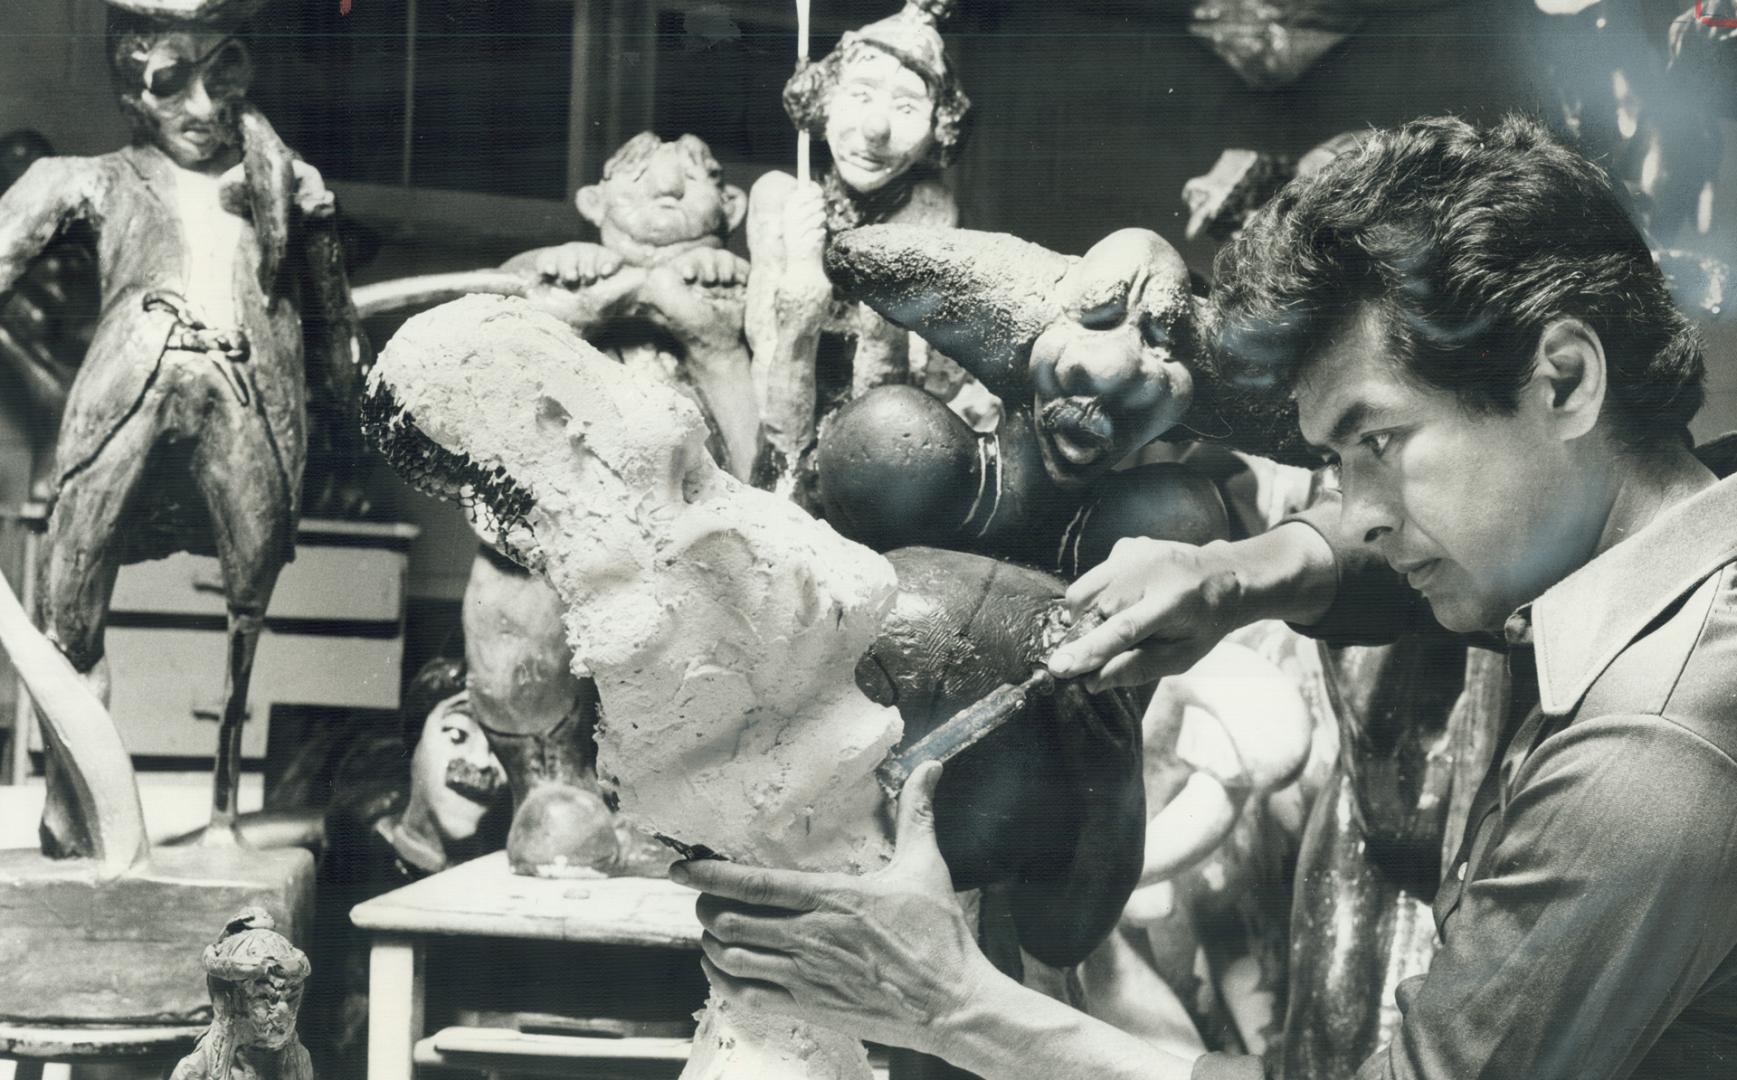 Agincourt Artist Don Chase works on one of his many sculptures in the basement at his home